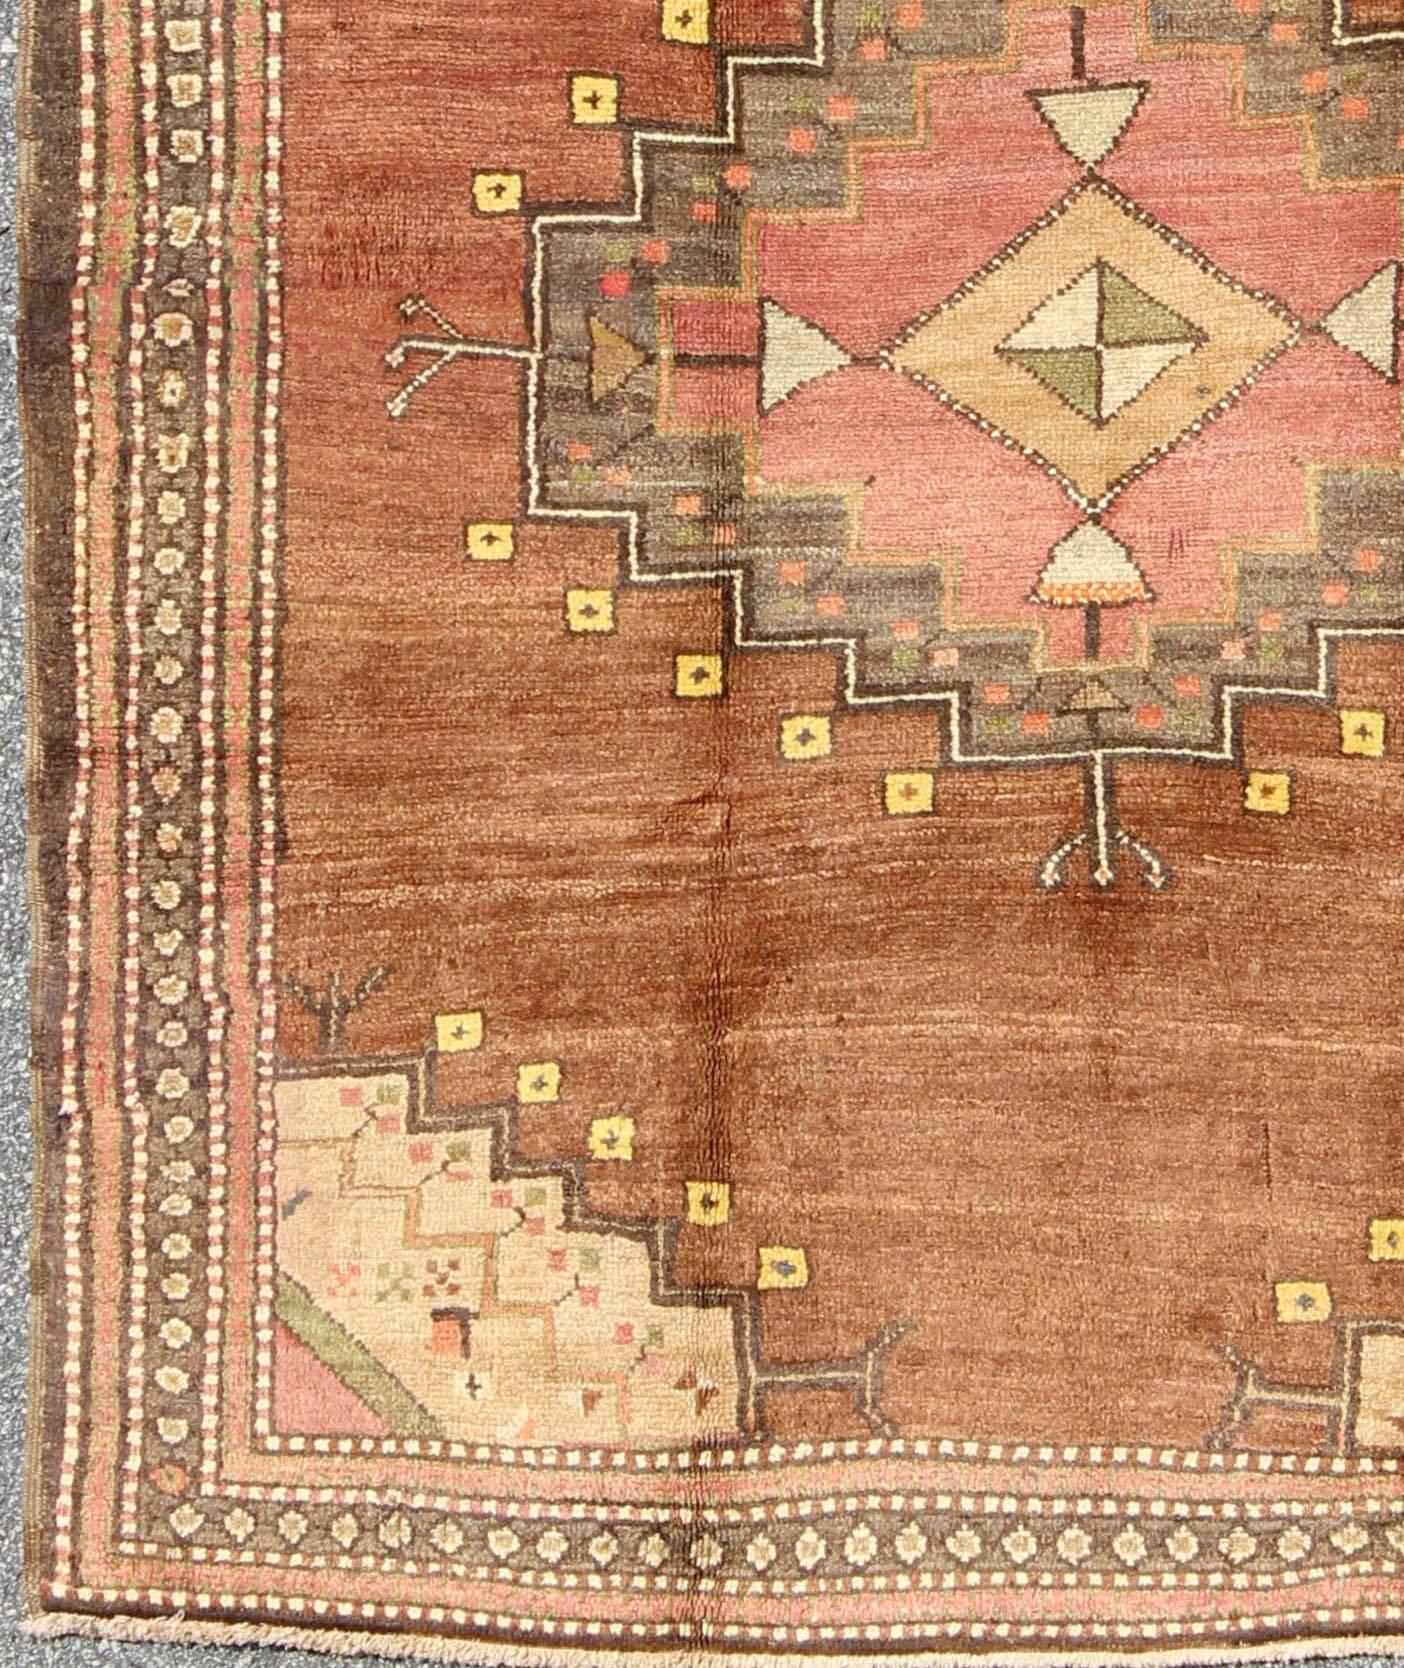 Tribal medallion vintage Turkish Oushak rug in shades of brown and red, rug tu-sim-136051, country of origin / type: Turkey / Oushak, circa 1940

This vintage Turkish Oushak rug features an intricately beautiful design with a tribal aesthetic. The